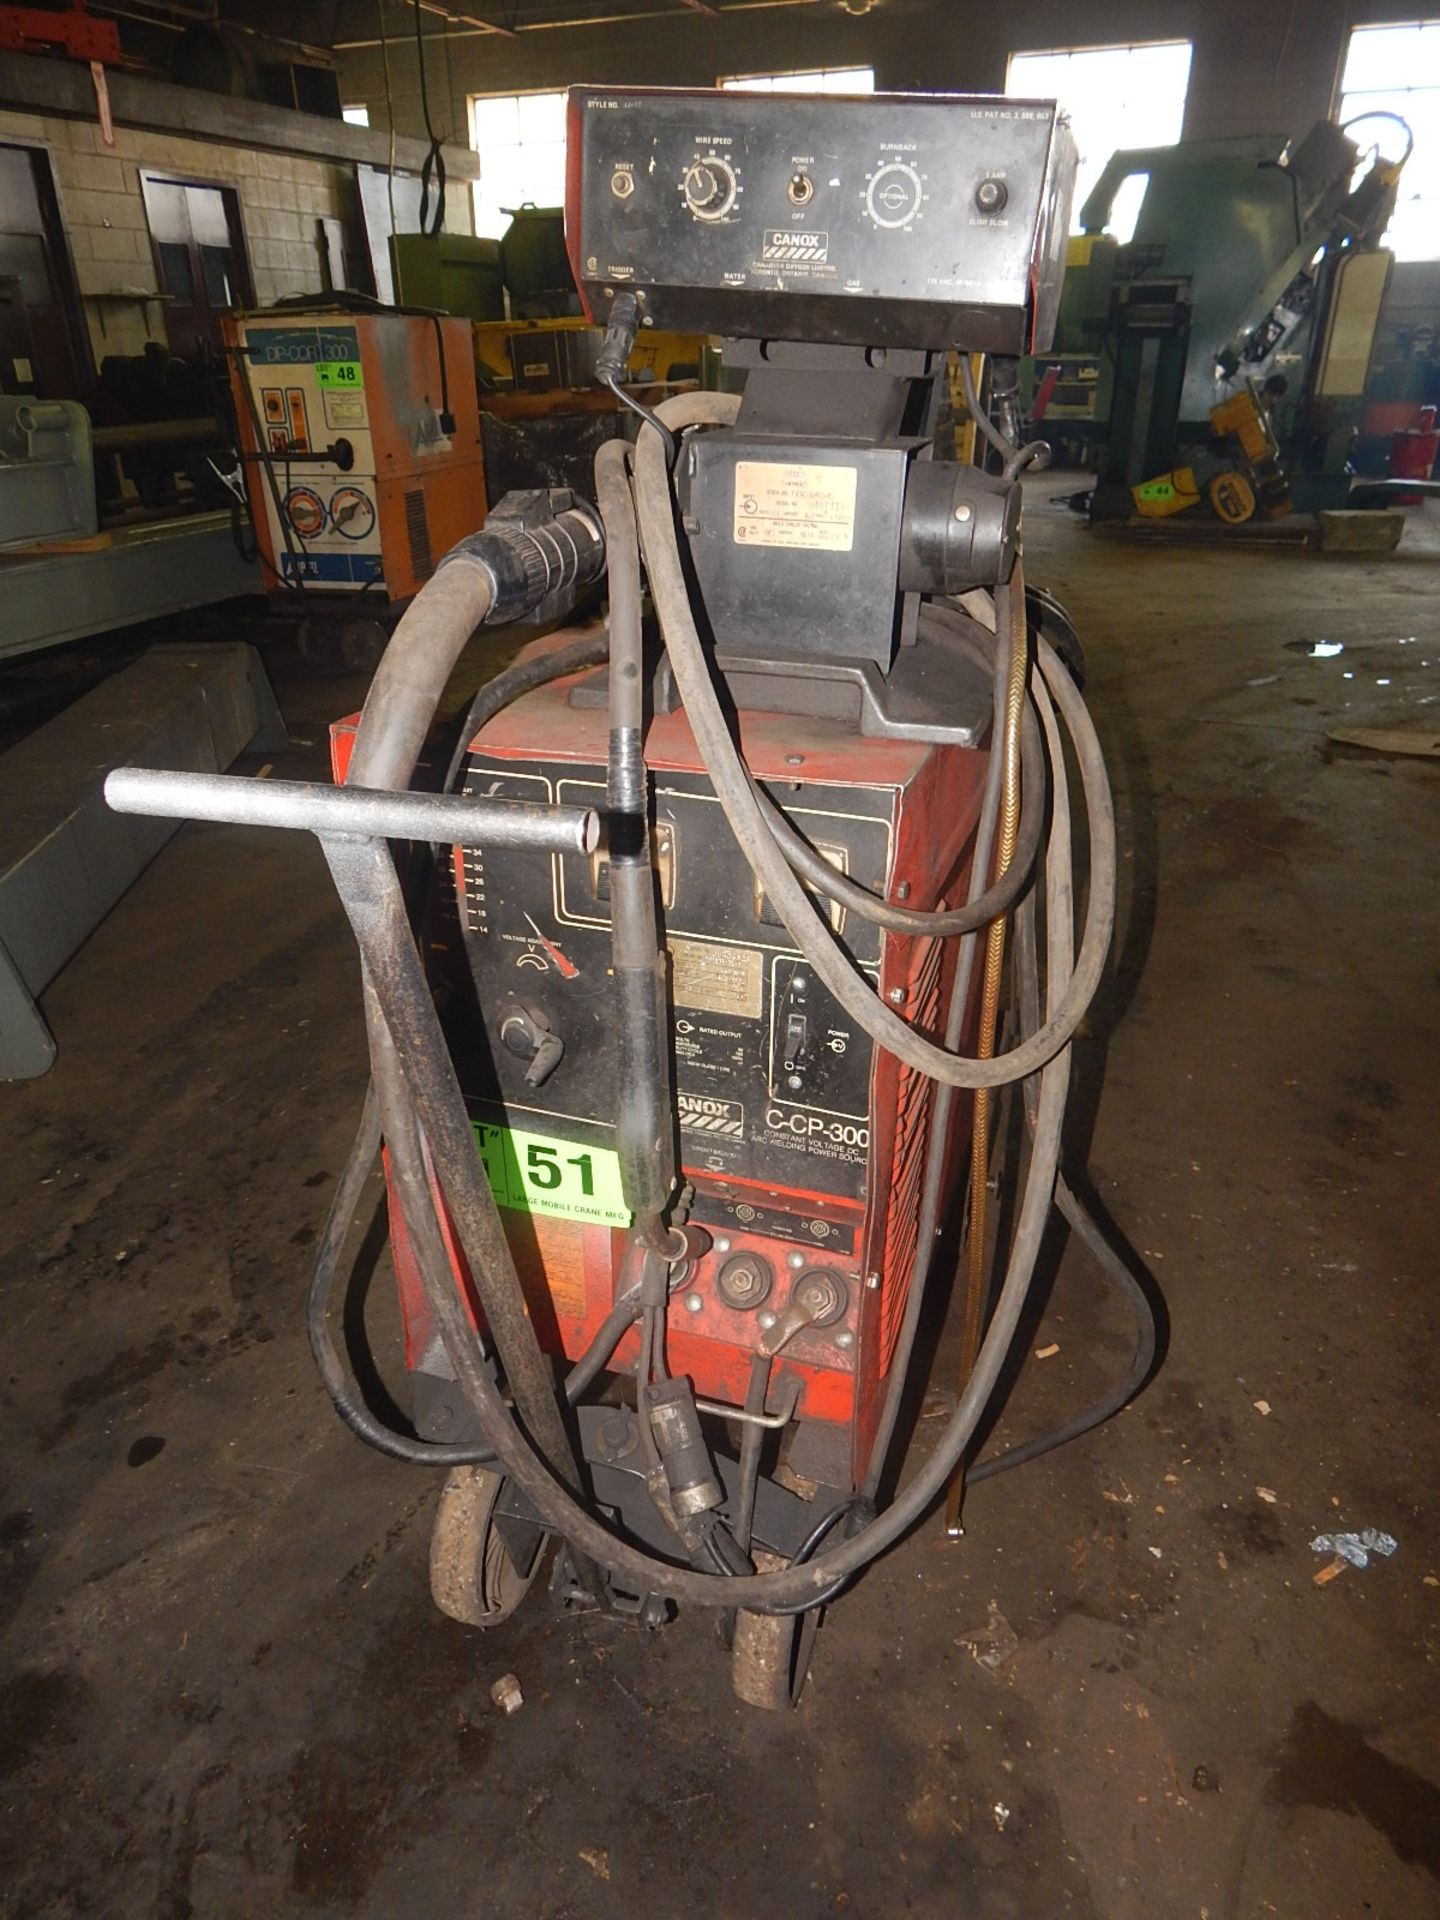 CANOX C-CP-300 MIG WELDER WITH WIRE FEED, S/N: N/A